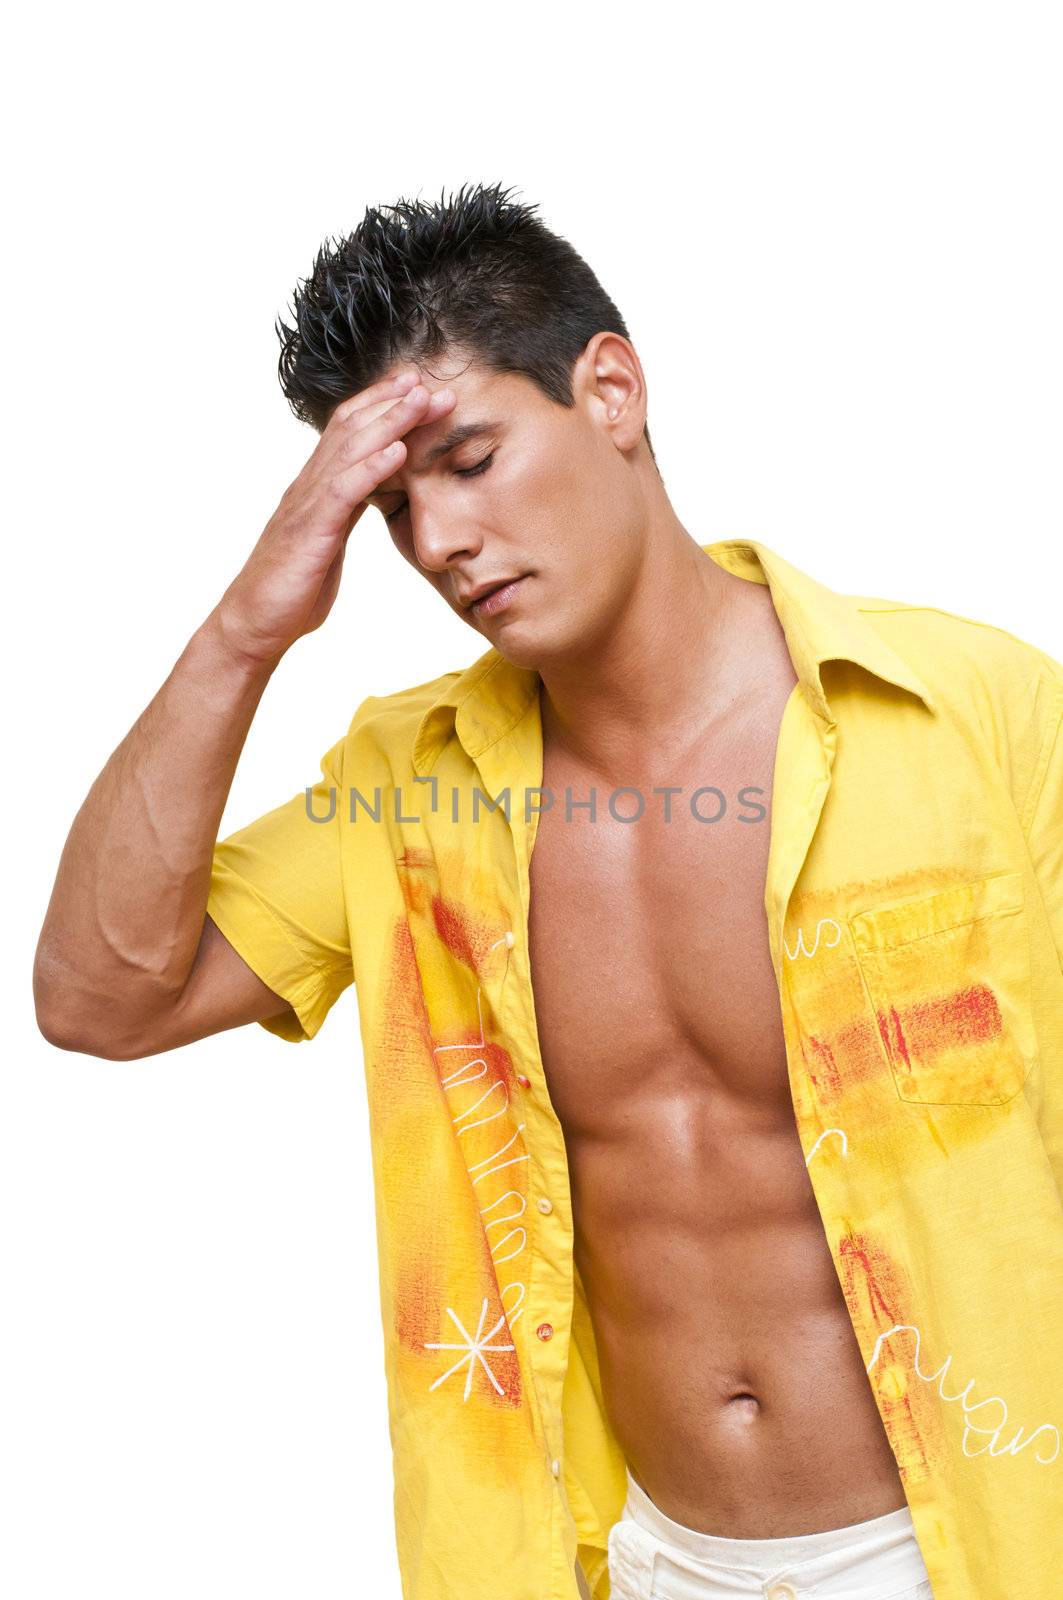 model photographed while wearing a shirt